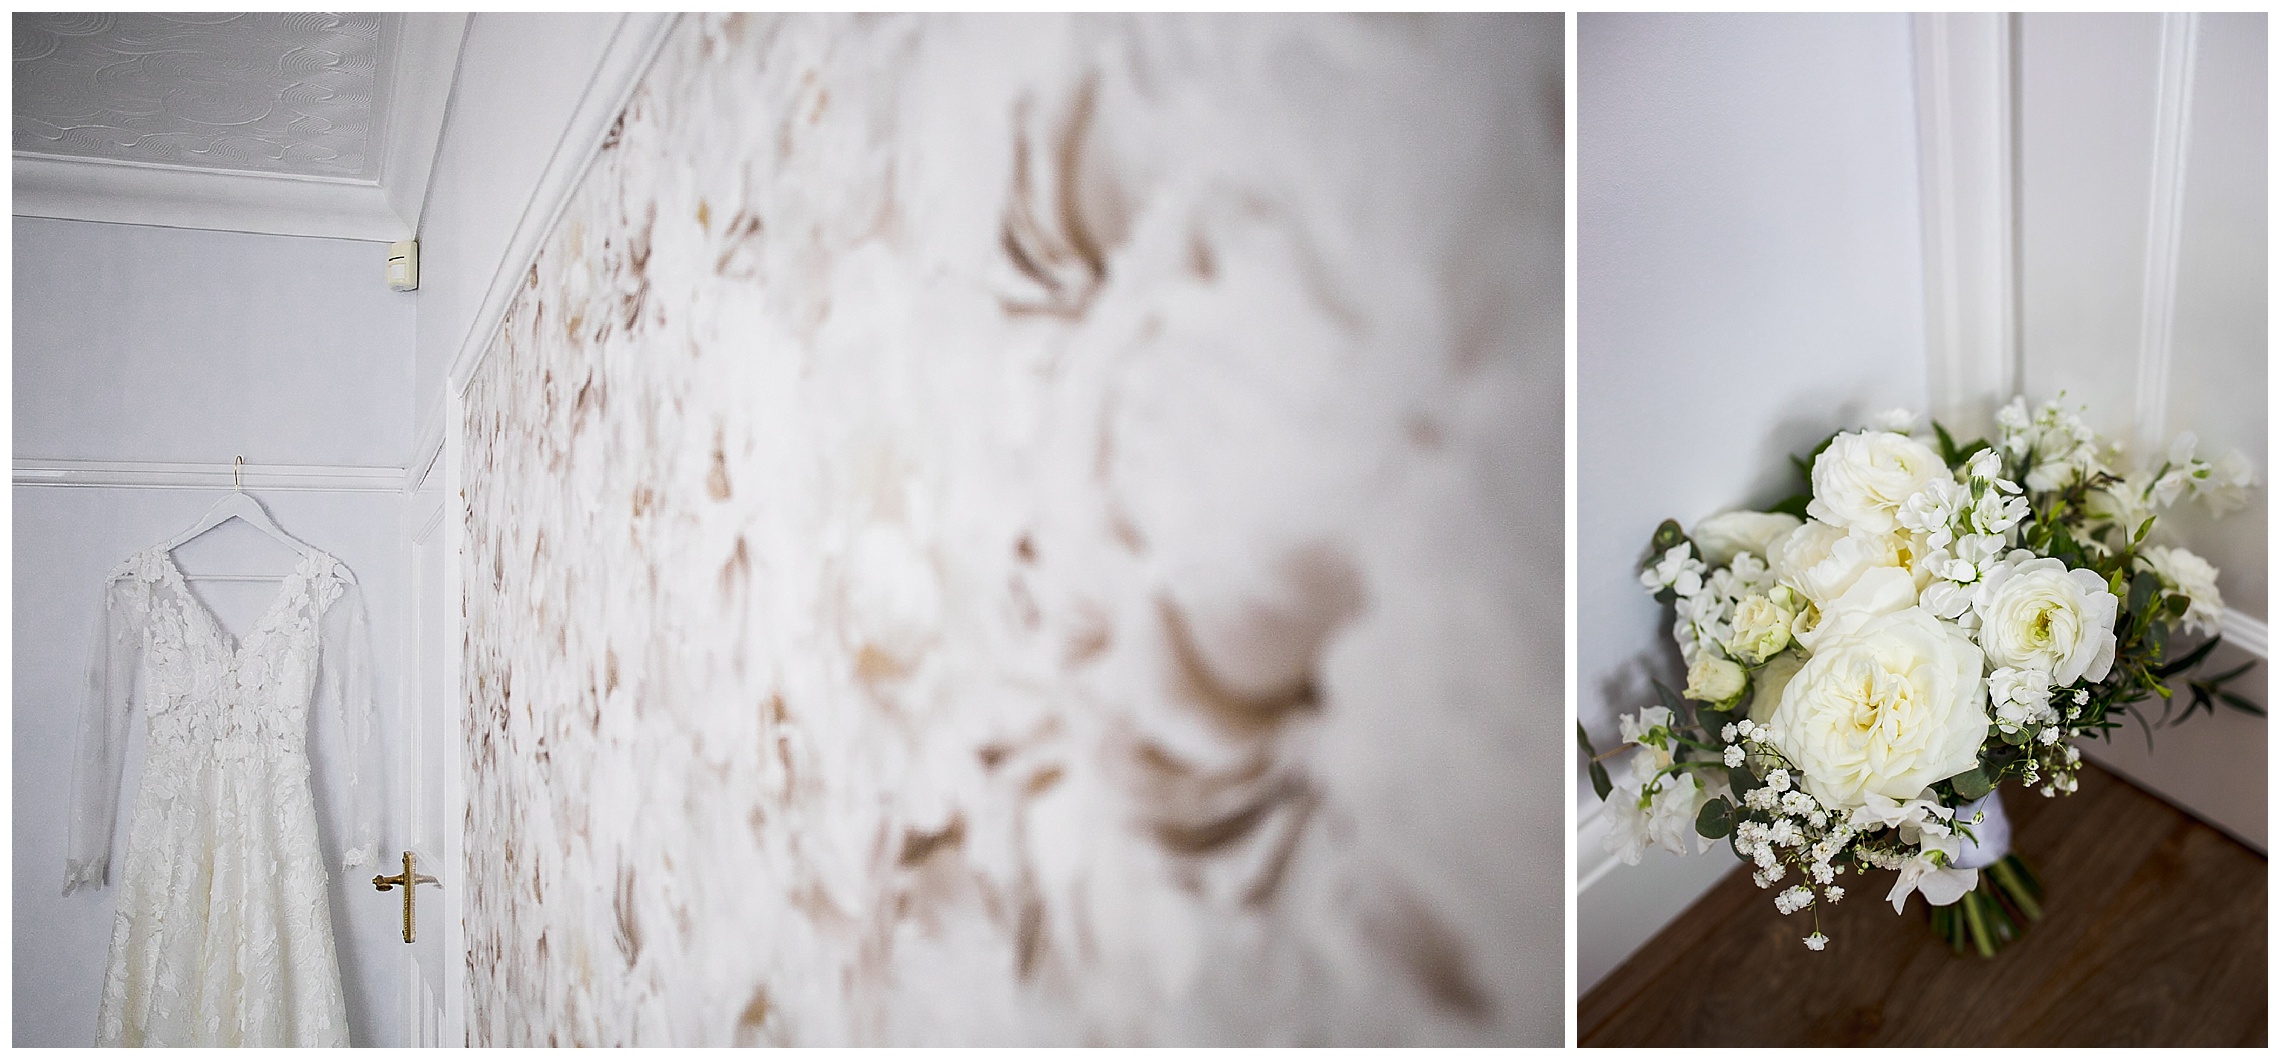 peony wallpaper with wedding dress against it, and white flowers